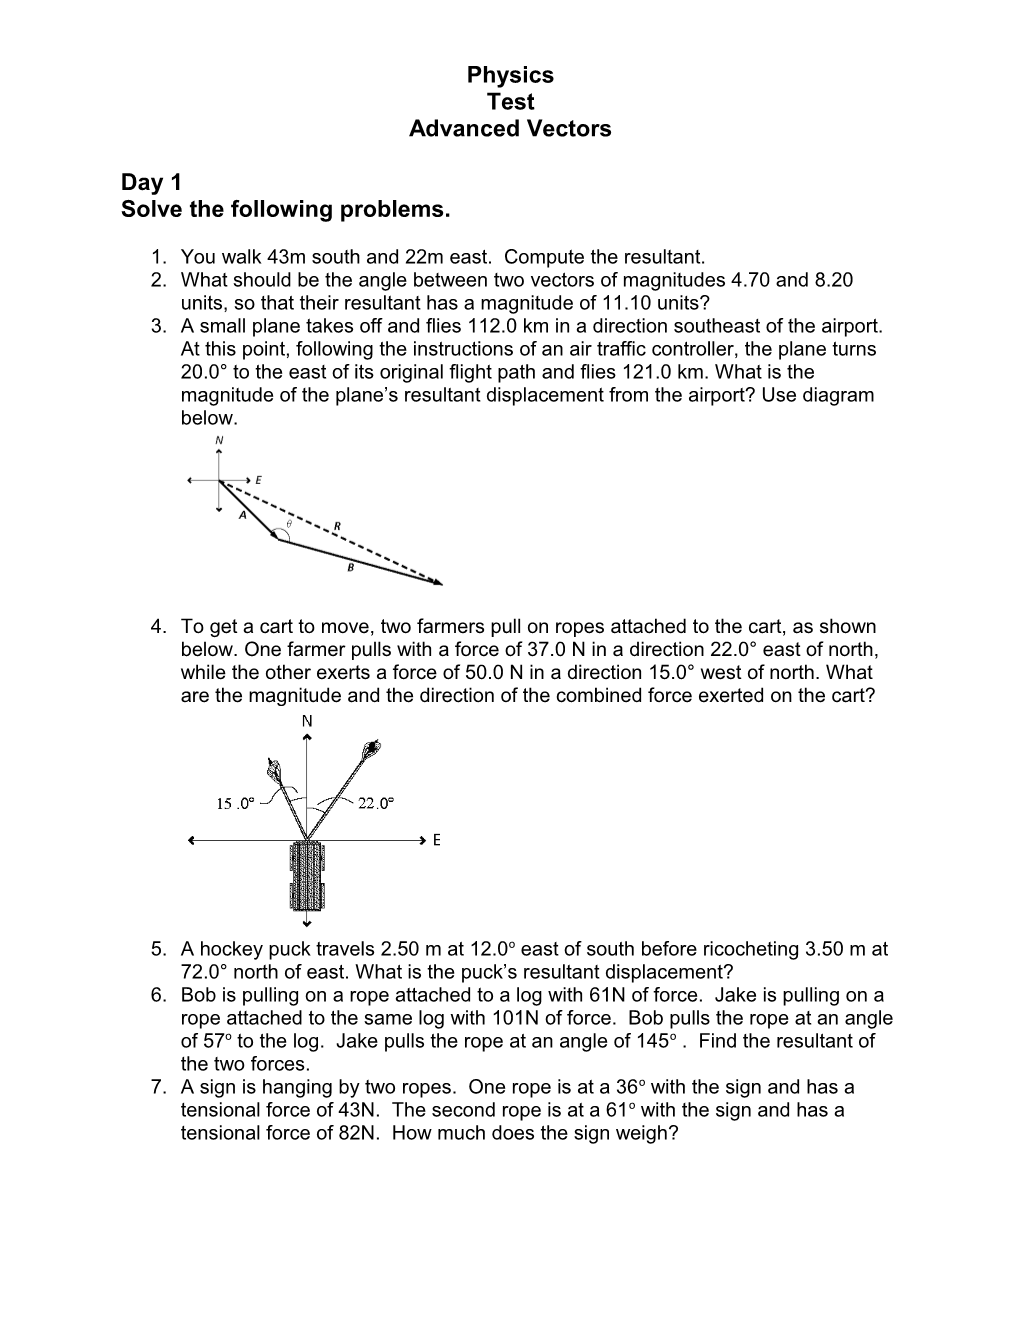 Solve the Following Problems s1